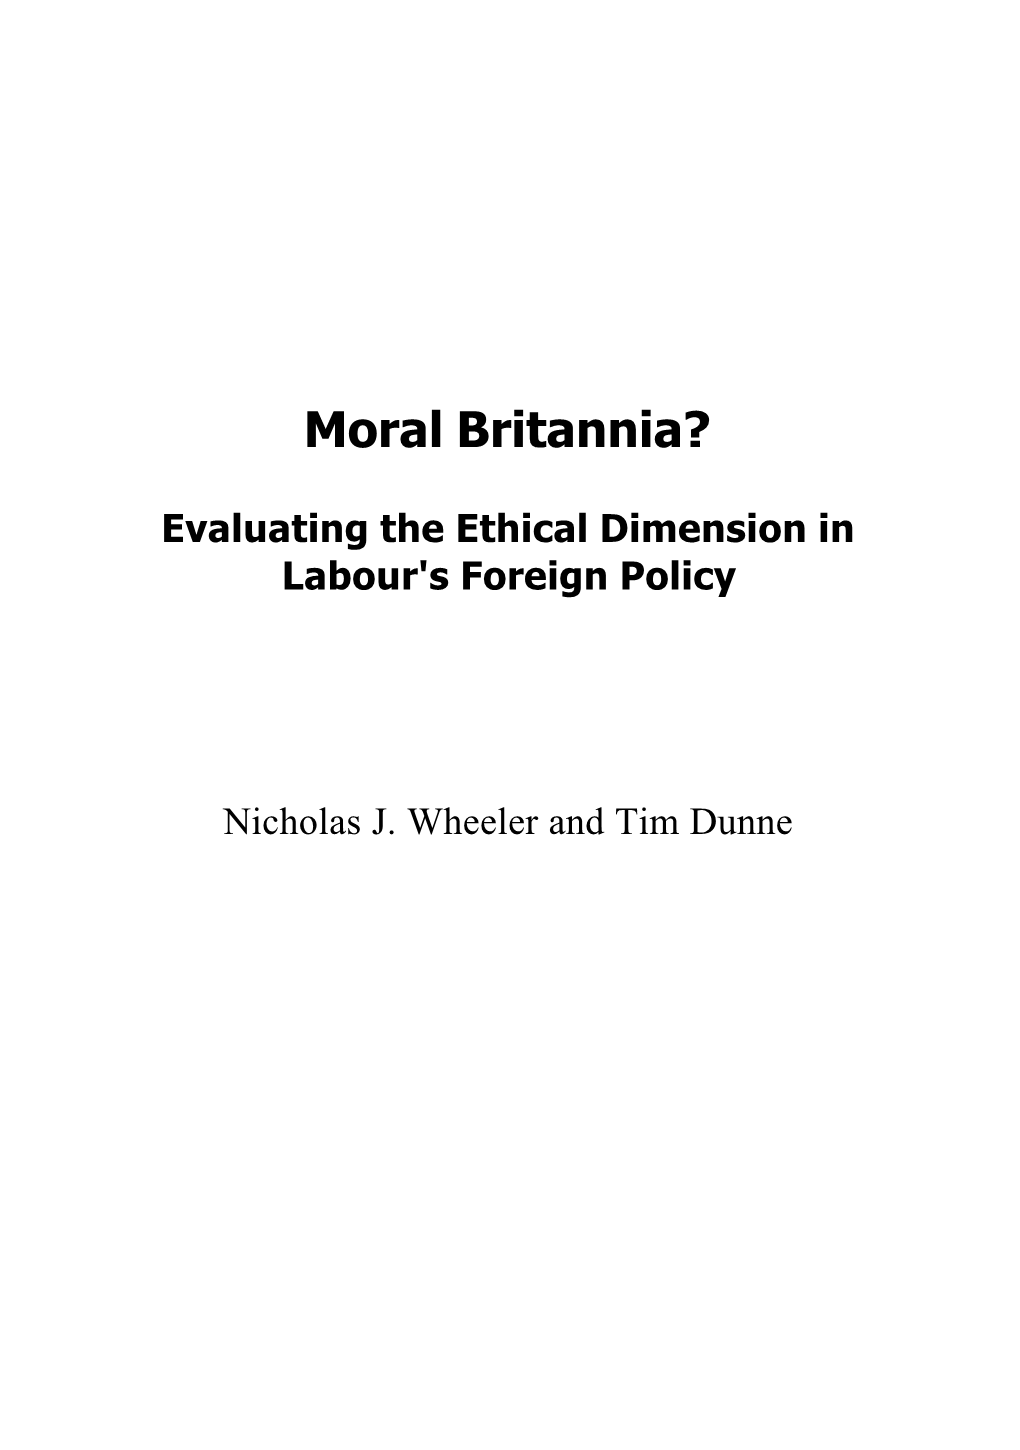 Evaluating the Ethical Dimension in Labour's Foreign Policy